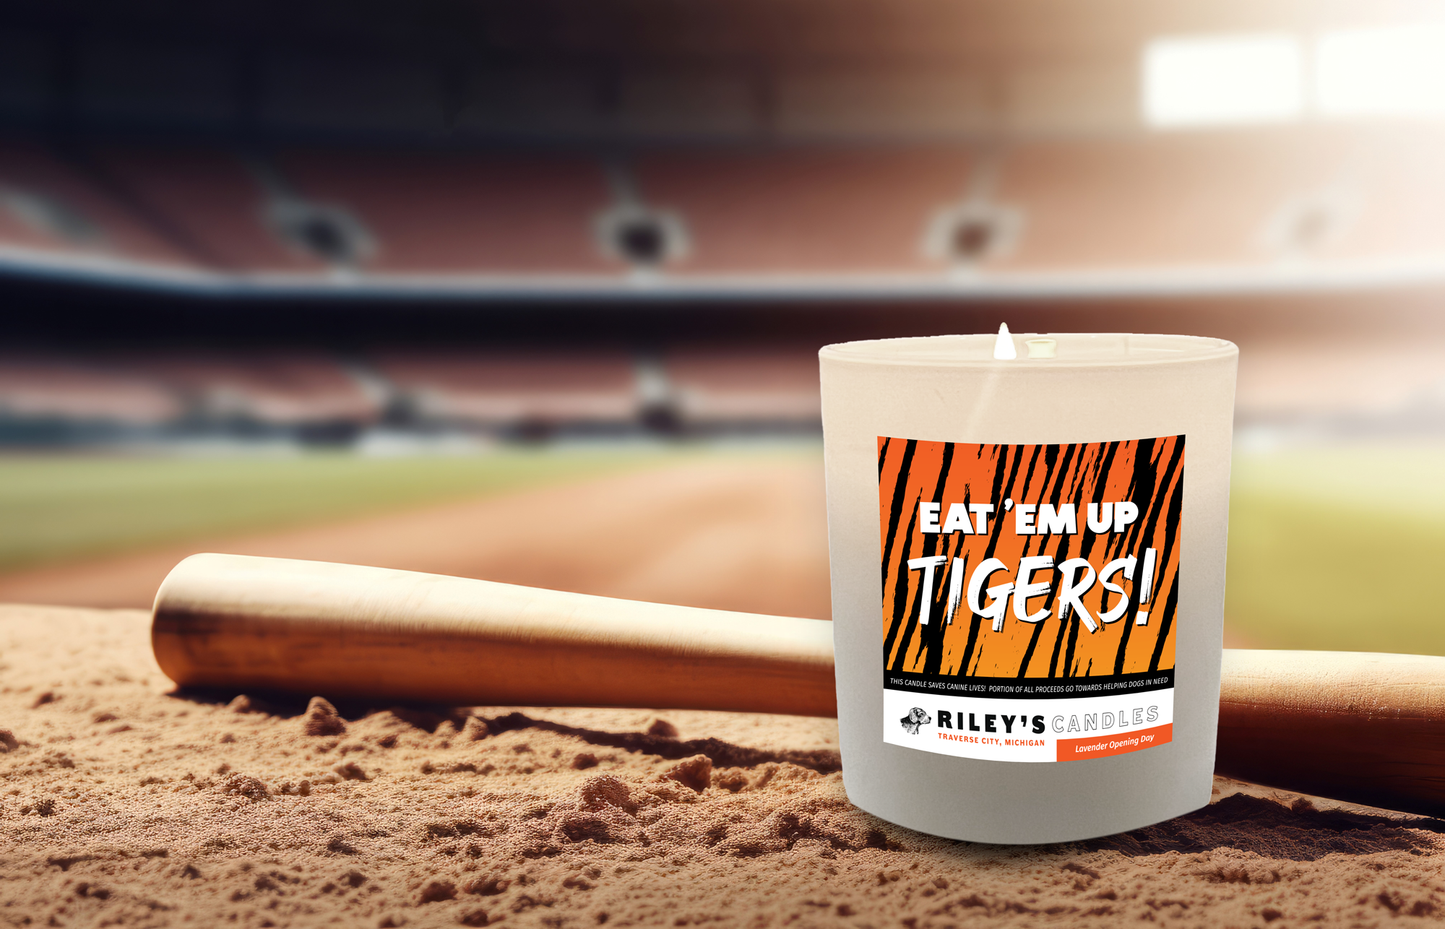 Tigers! Lavender and Leather Opening Day!